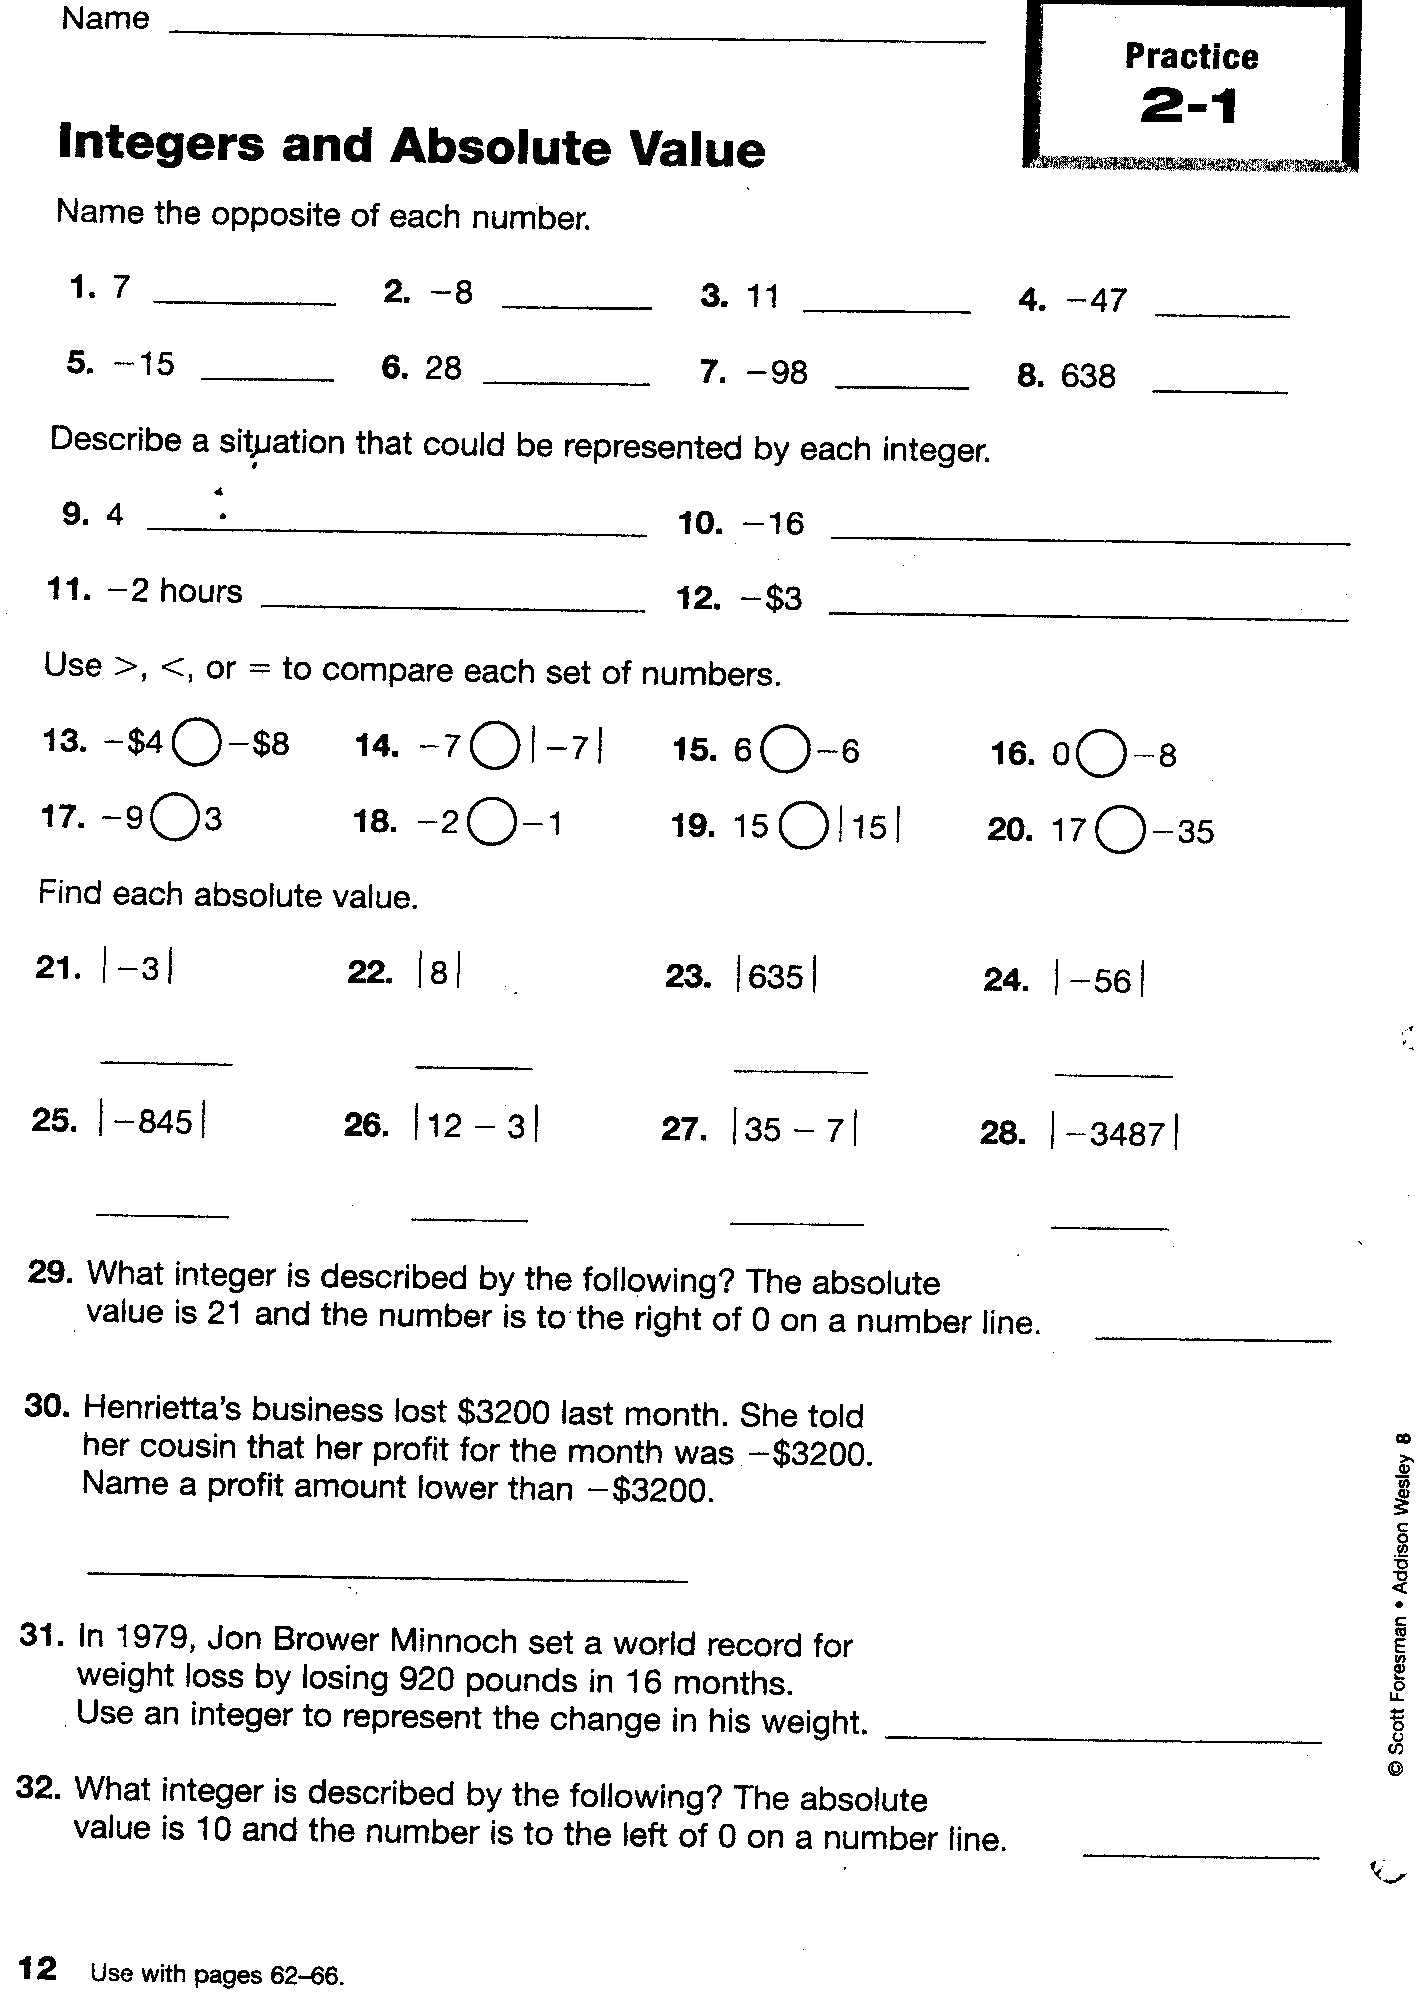 Free Printable Ged Worksheets Along With Printable Gede Worksheets | Free Printable Ged Worksheets